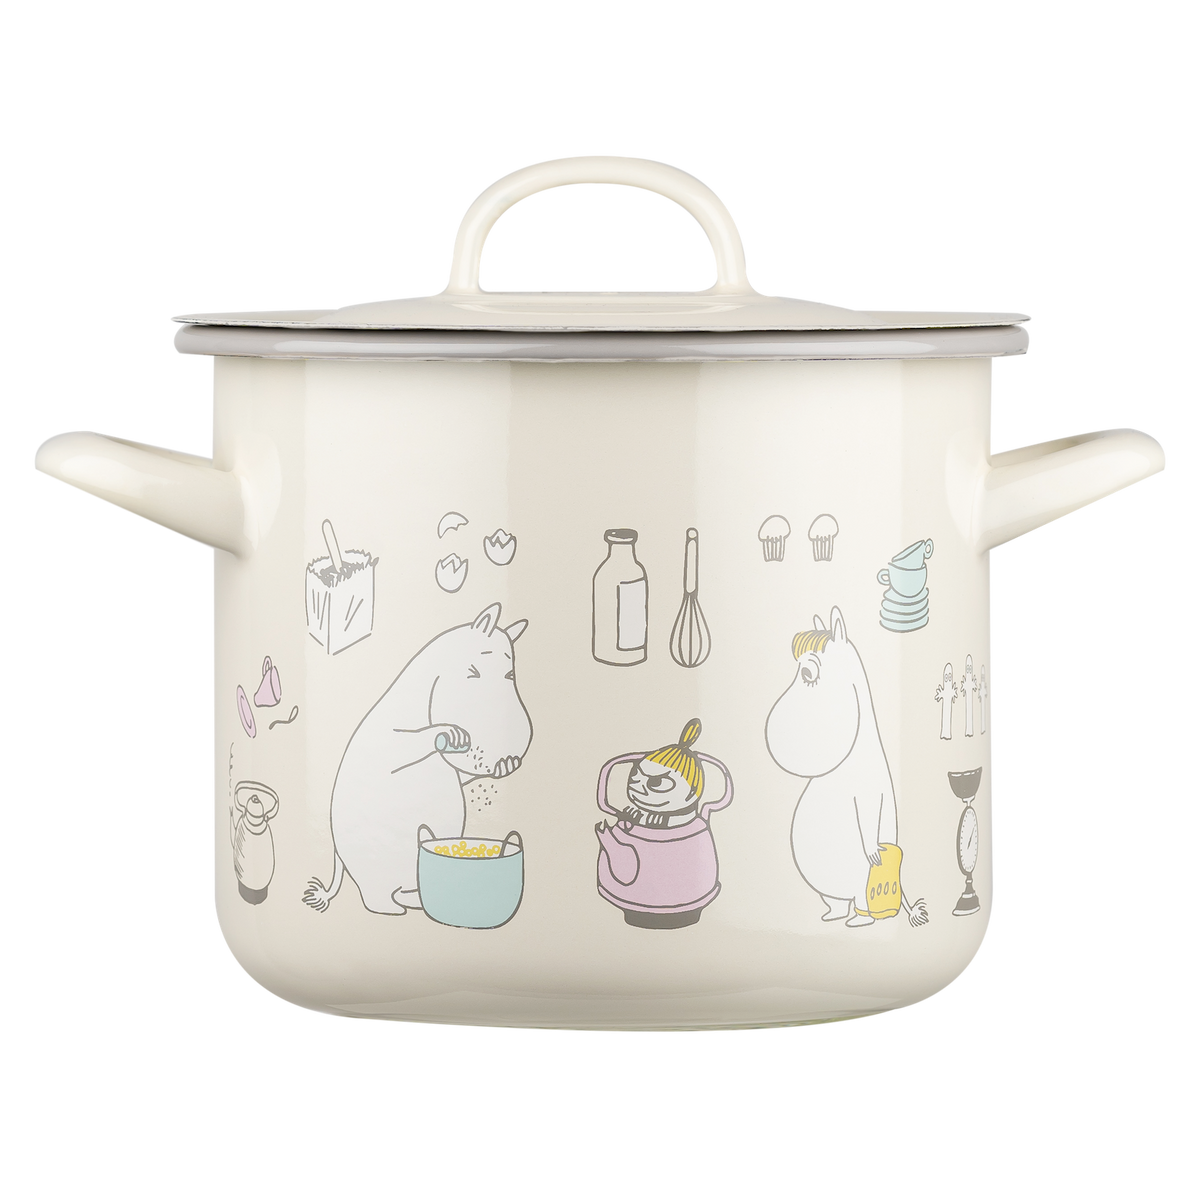 Moomin by Muurla, Bon Appétit Enamel Cooking Pot with Lid, 2.5 L, made in carbon steel enamelware 